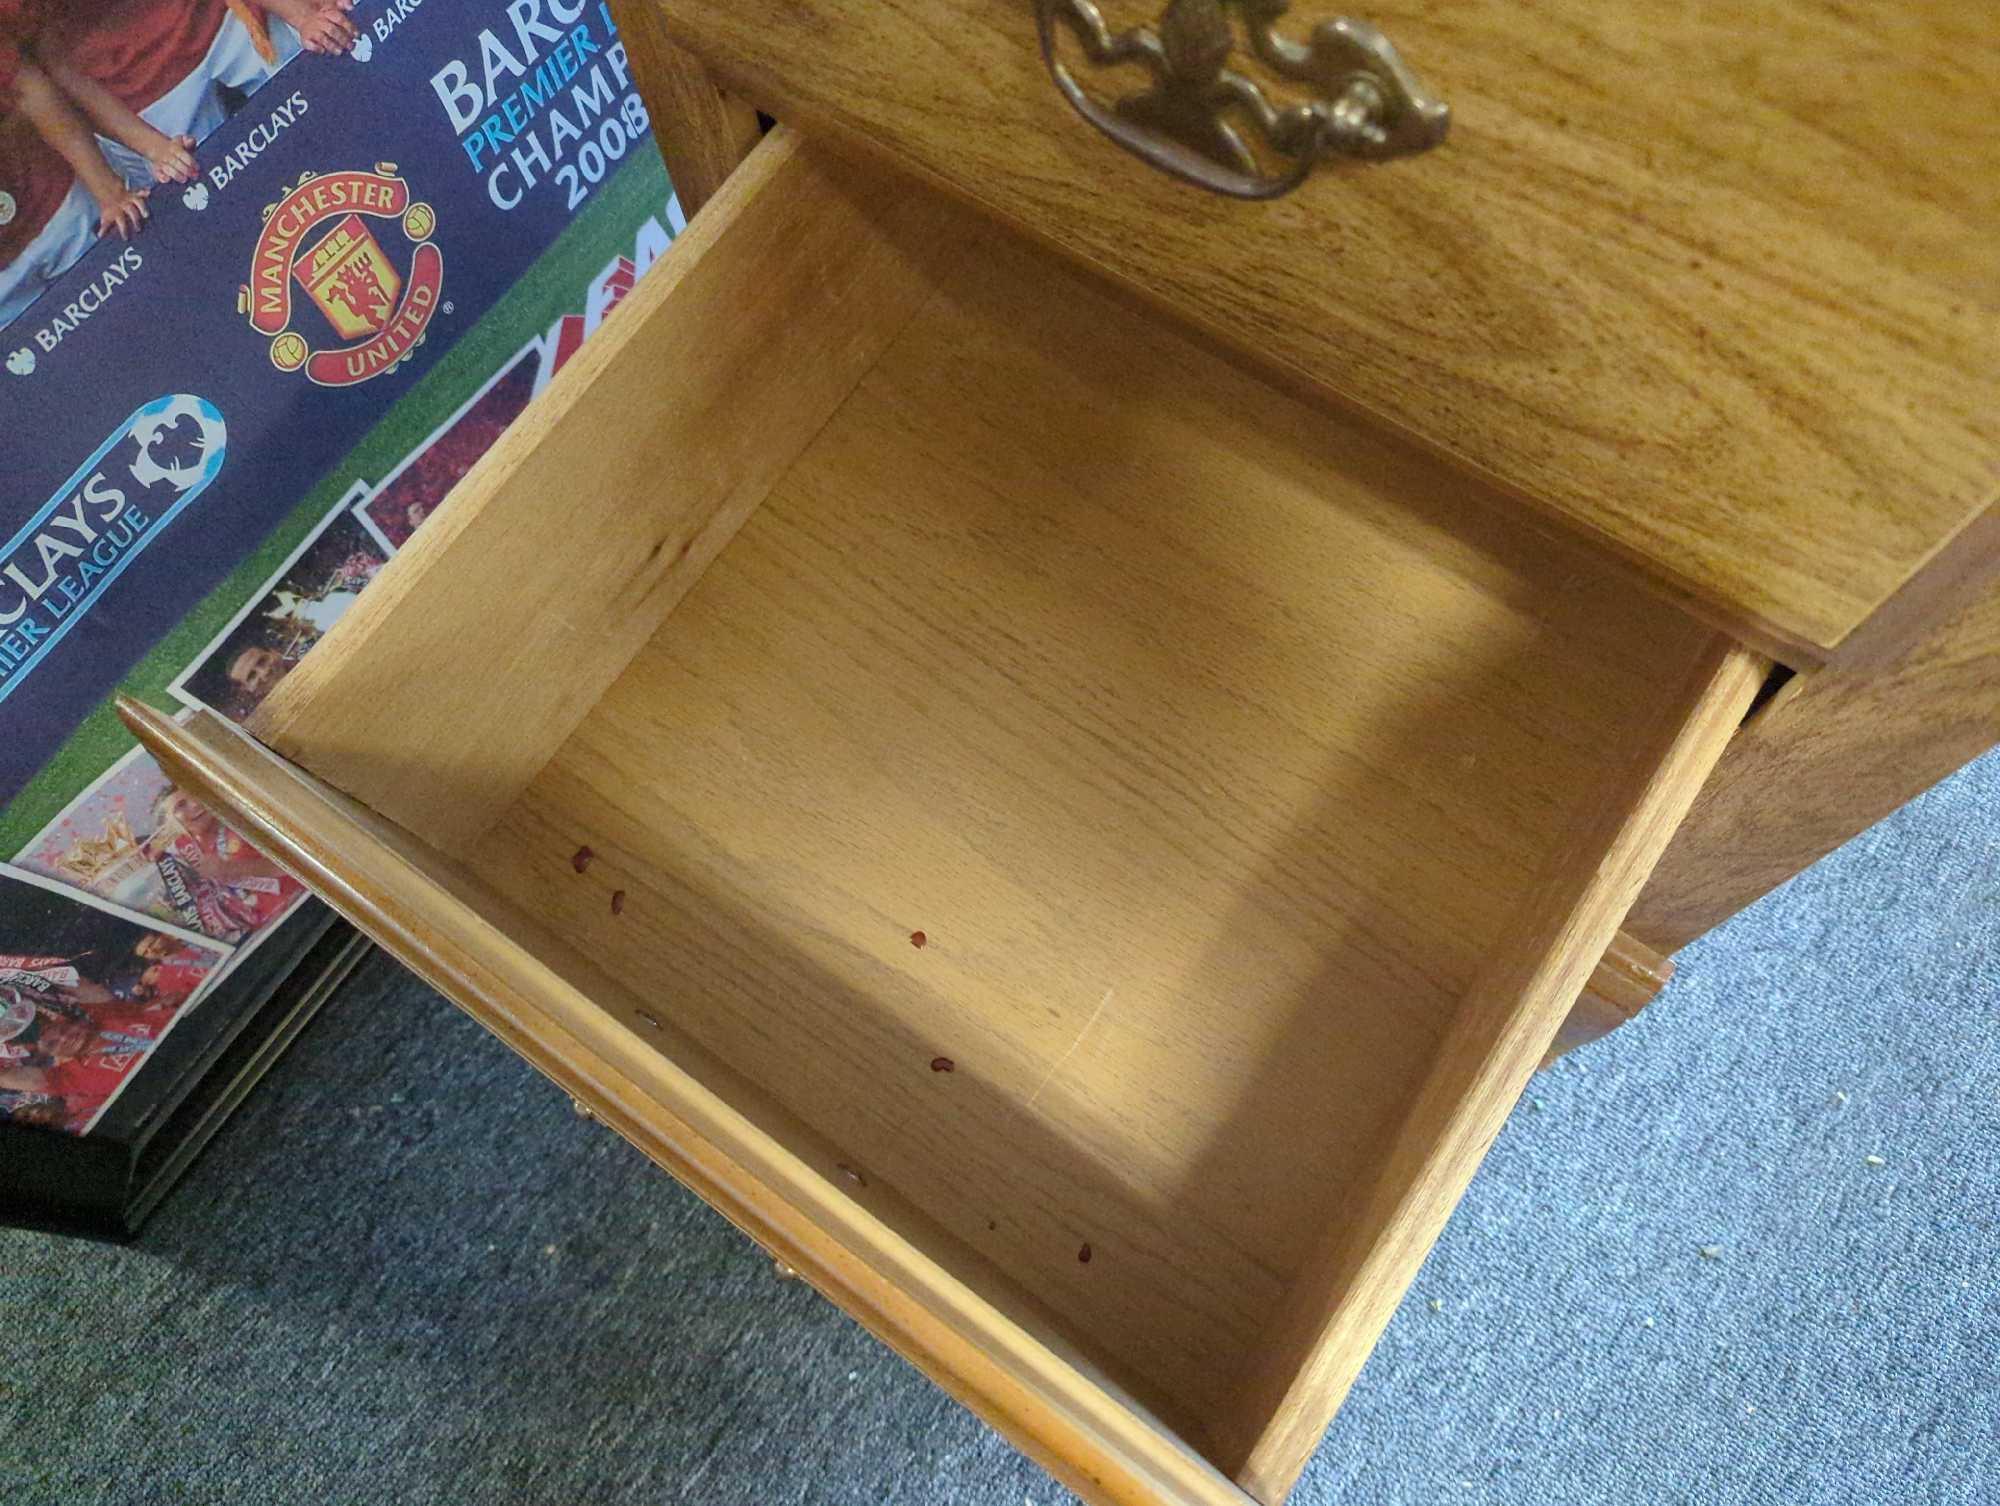 Vintage Basset desk with 4 drawers. Comes as is Shannon. Photos. Appears to be used. All items